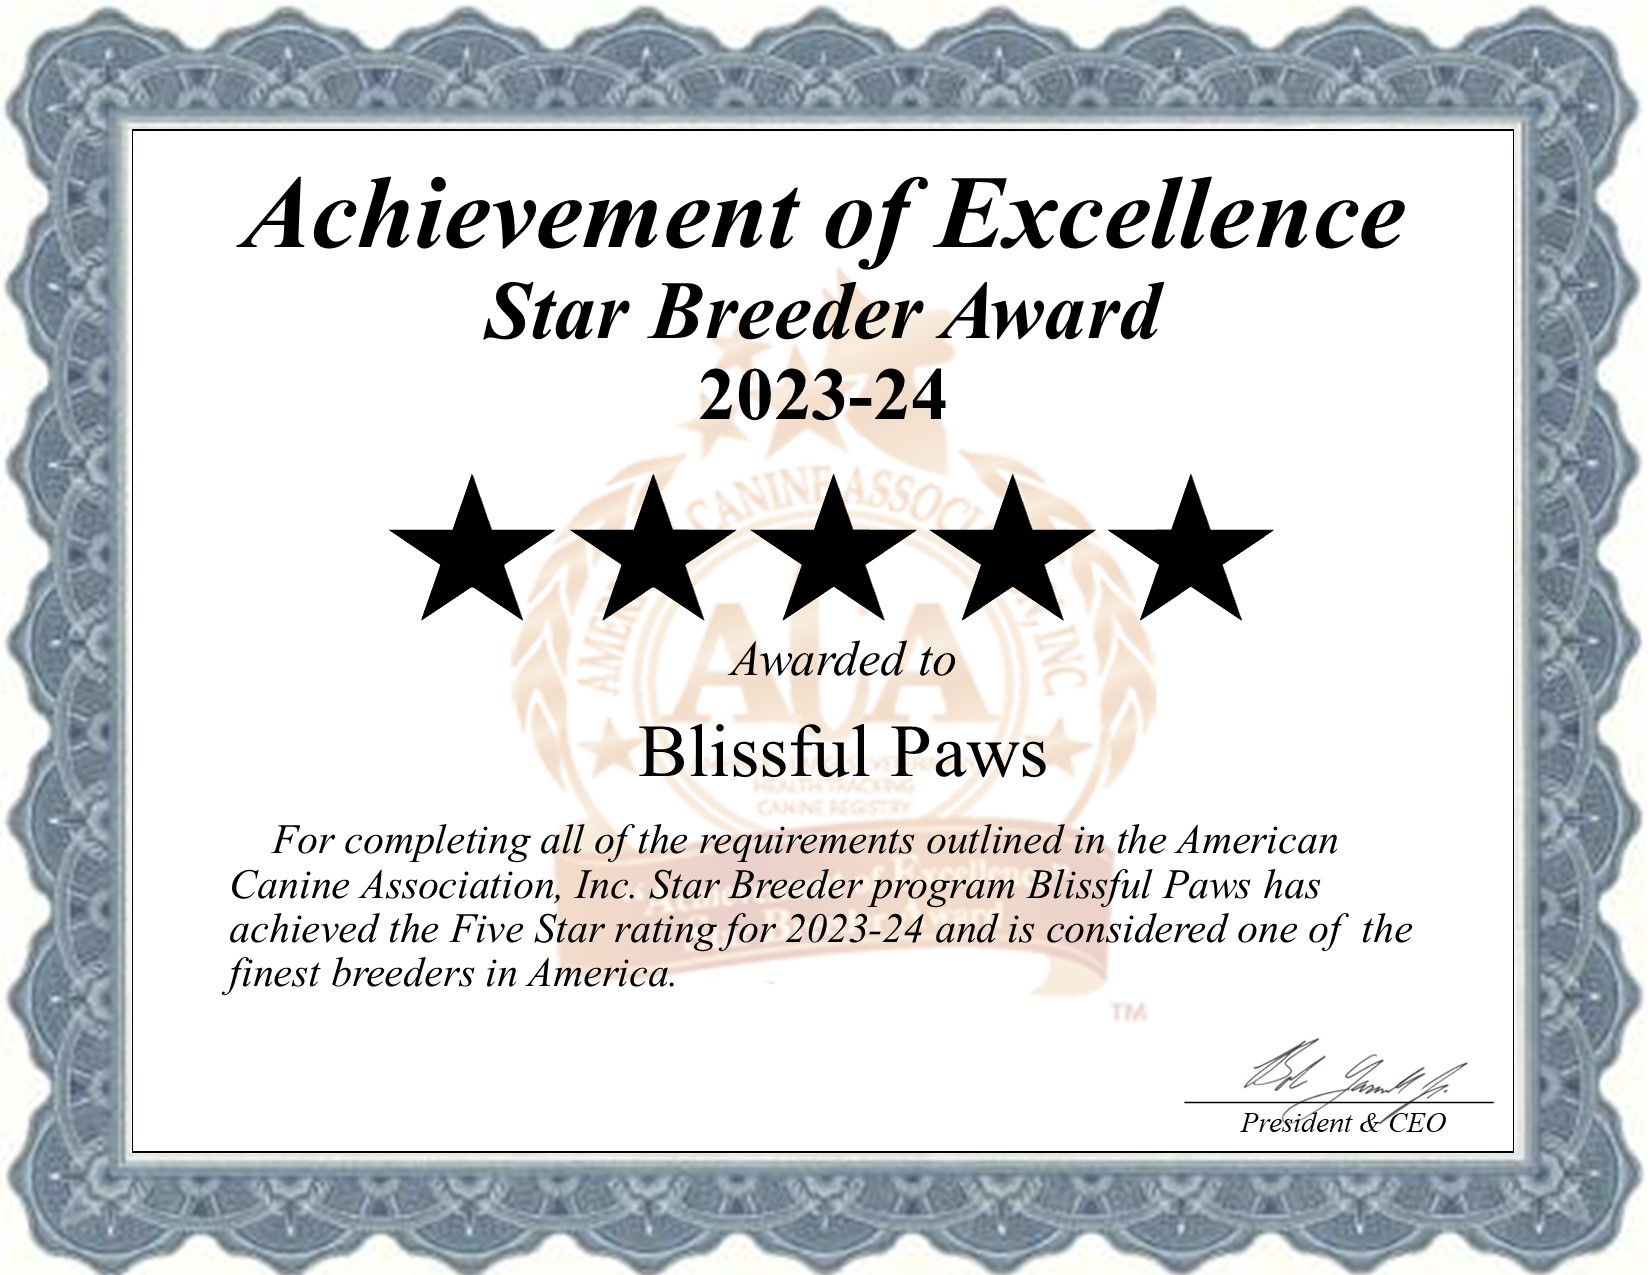 Blissful, Paws, dog, breeder, star, certificate, Blissful-Paws, New Providence, PA, Pennsylvania, puppy, dog, kennels, mill, puppymill, usda, 5-star, aca, ica, registered, Golden Retriever, none